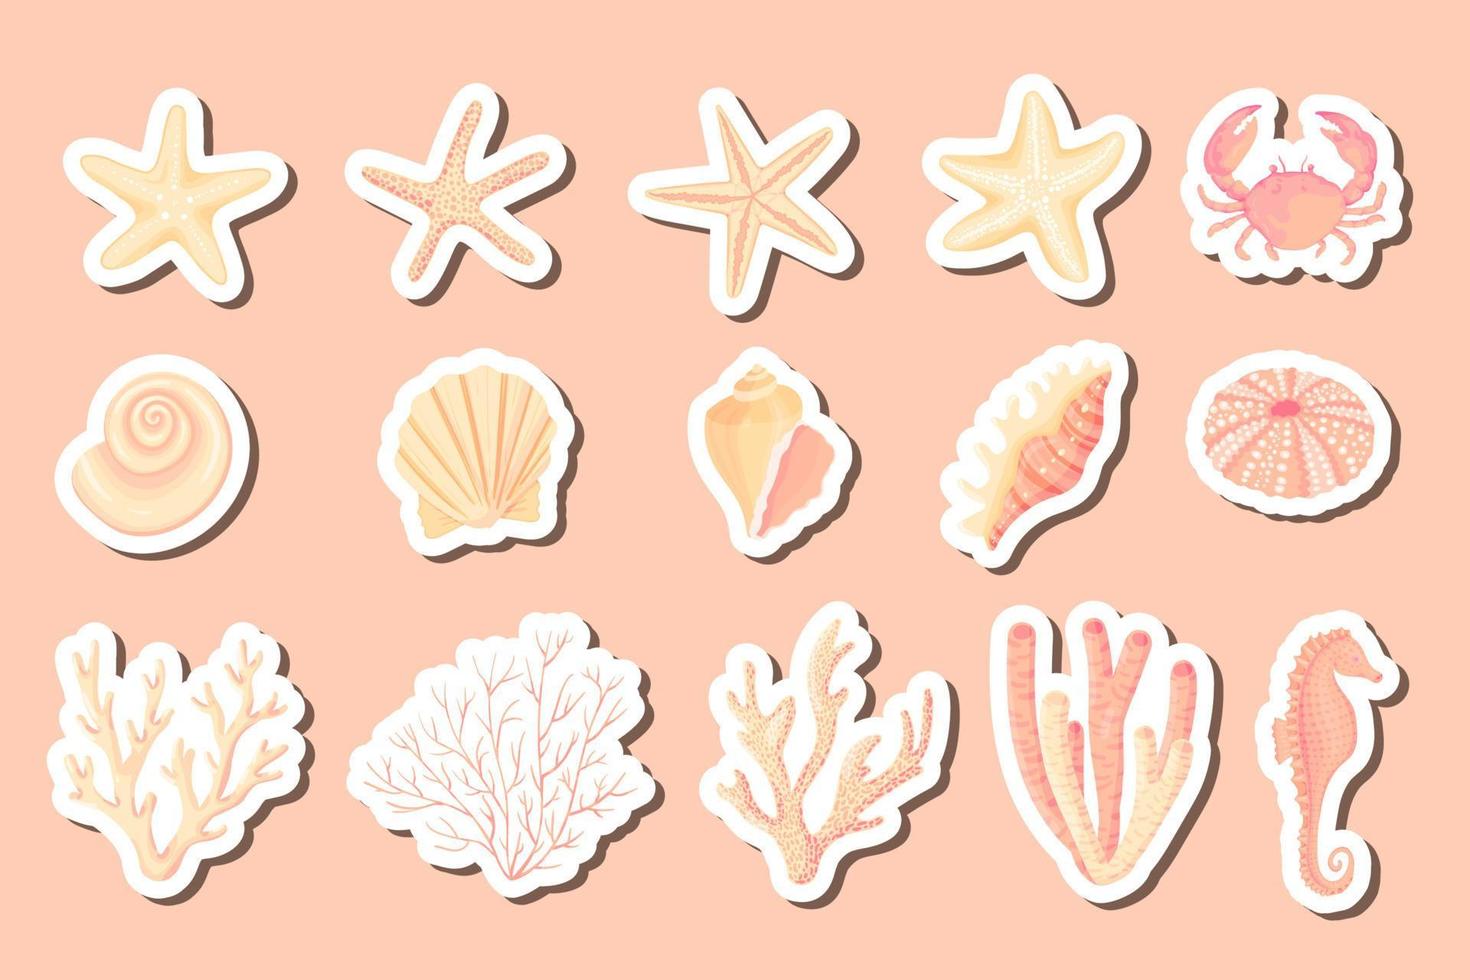 Seashells vector set. Collection of flat, cartoon sketch stickers of molluscs seashells, starfish, sea urchin, seahorse, hippocampus, crab, coral. Trendy coral reef under water isolated elements